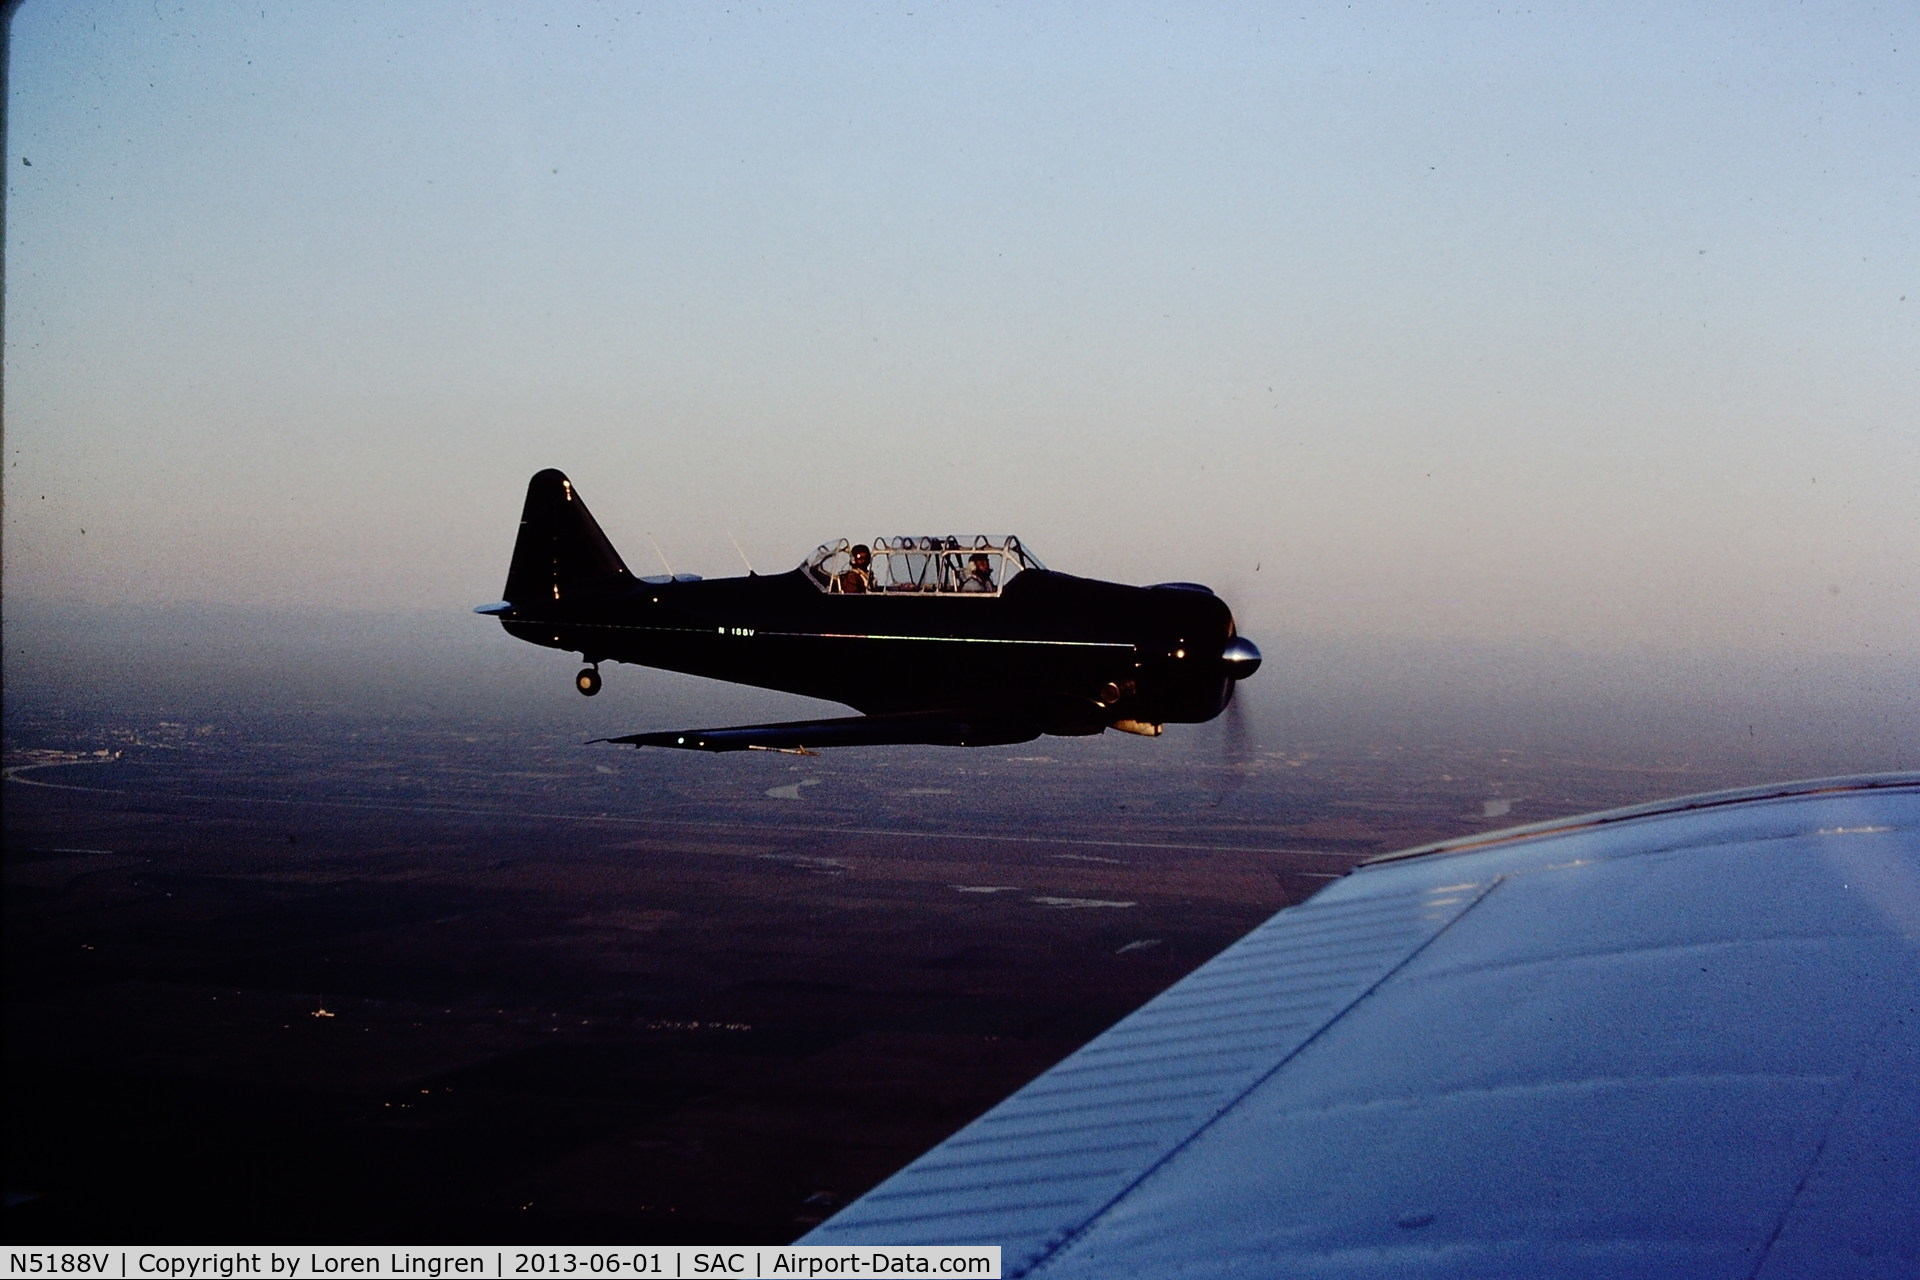 N5188V, North American T-6G Texan C/N 168-302, The original photo is a slide taken around 1976.  I scanned it, though the quality is not too good.